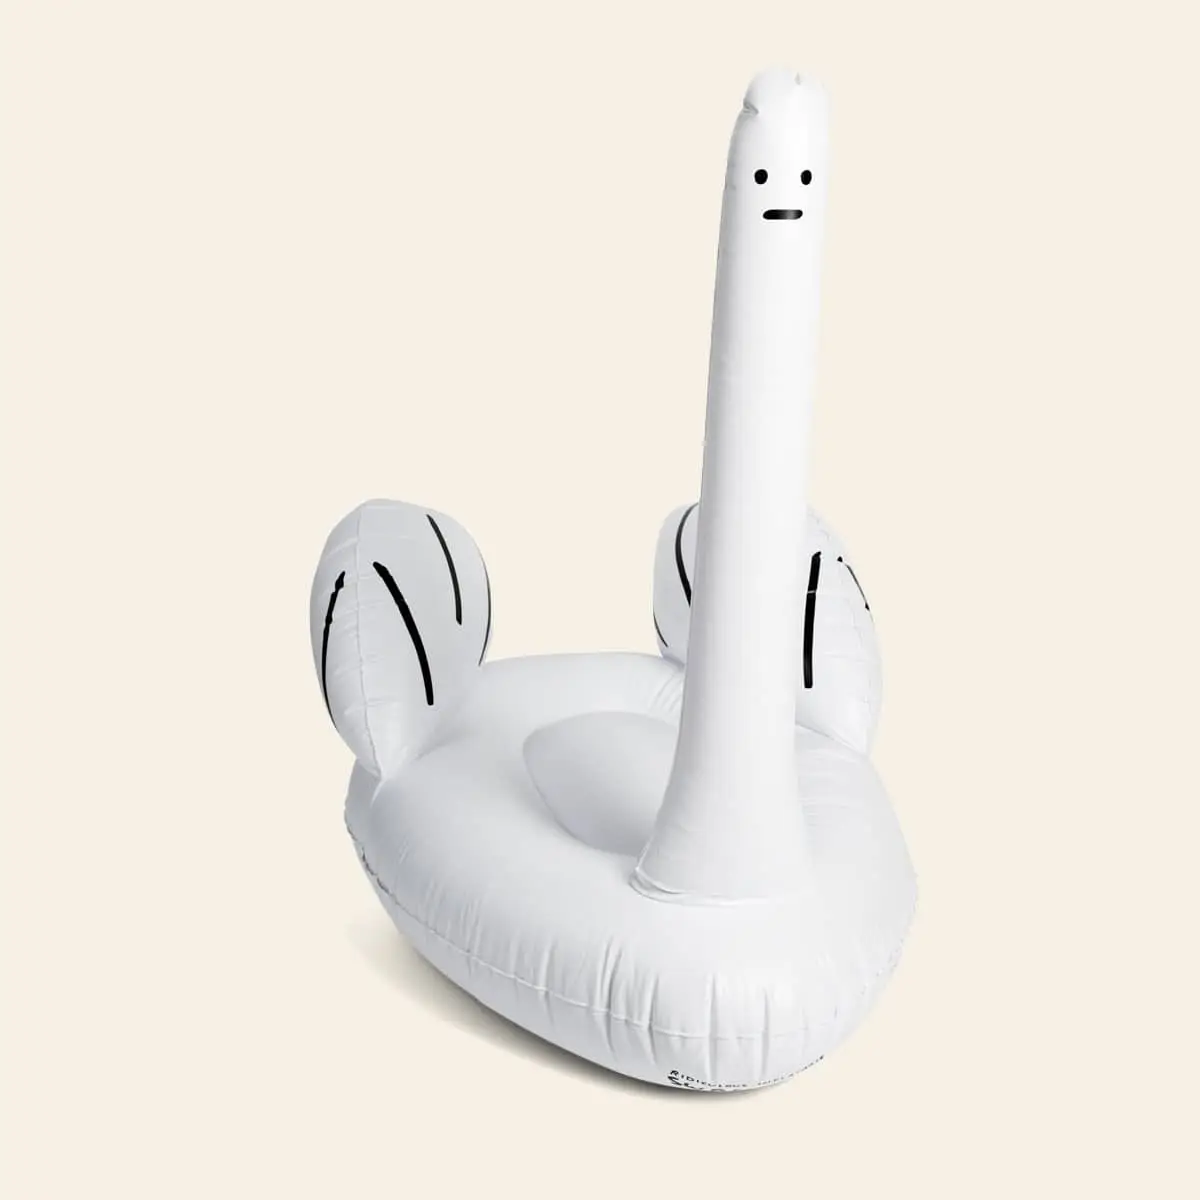 Third Drawer Down David Shrigley Ridiculous Inflatable Swan Thing White 1